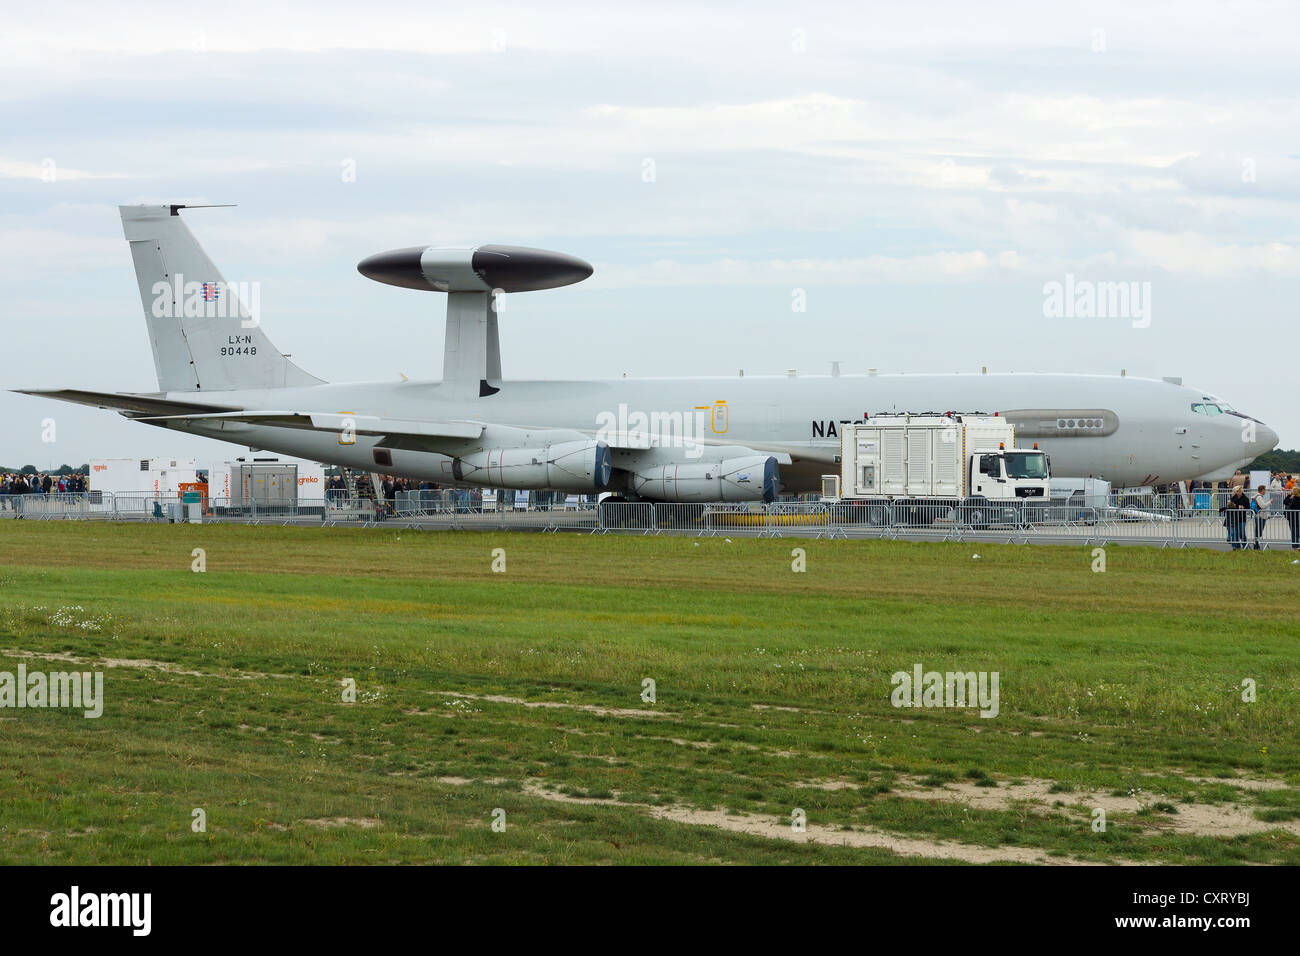 Boeing E-3 Sentry is an airborne early warning and control (AWACS) Stock Photo